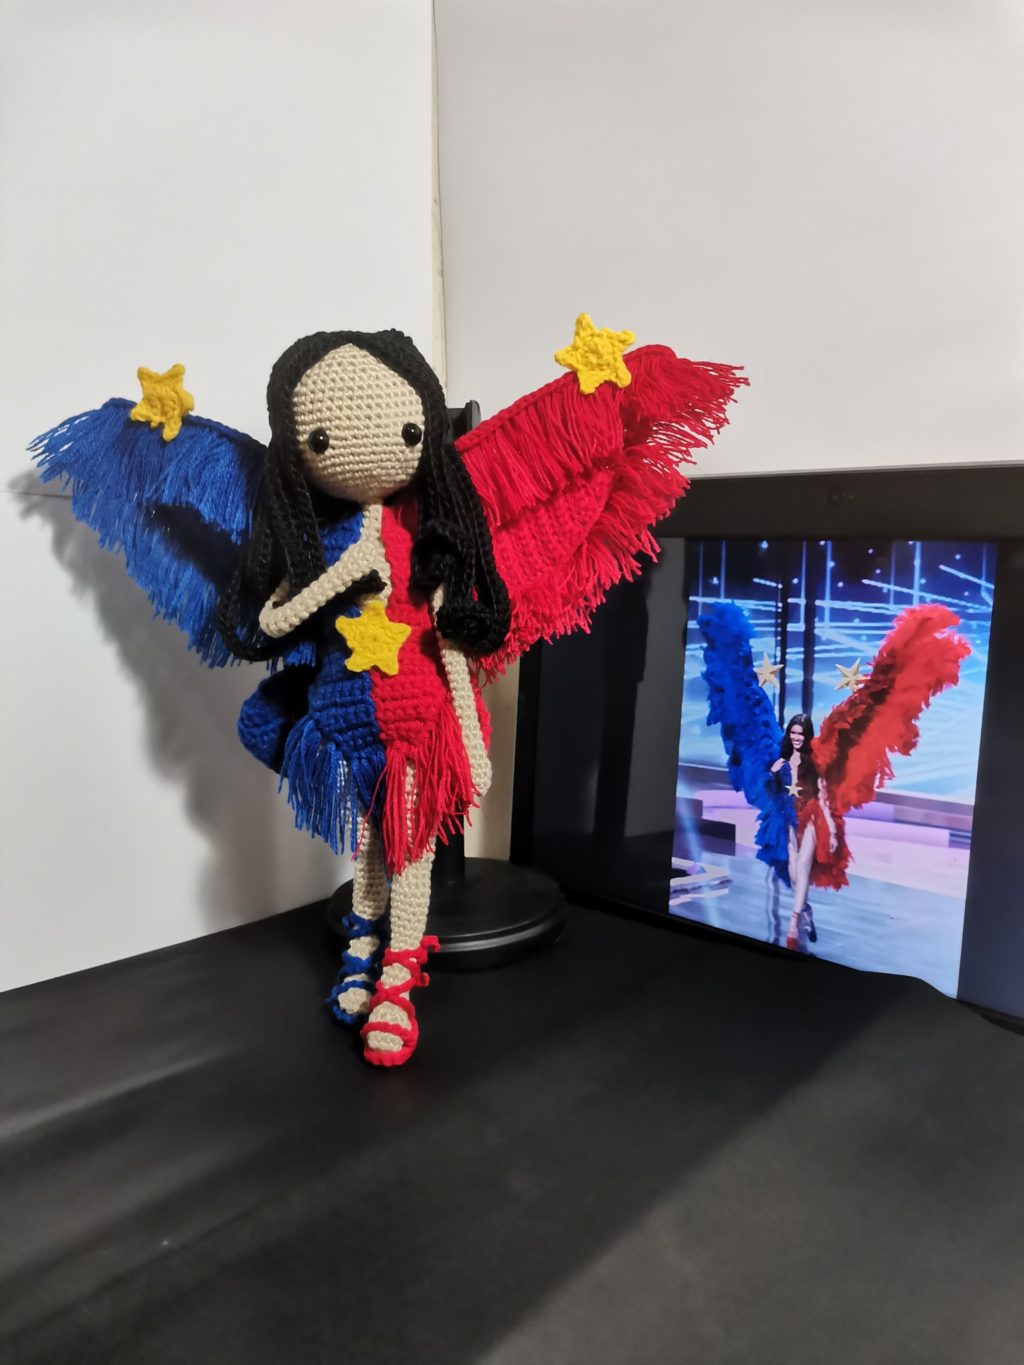 TRIBUTE TO RABIYA: Pardo wife makes crochet doll to pay tribute to Rabiya's courage and beauty.